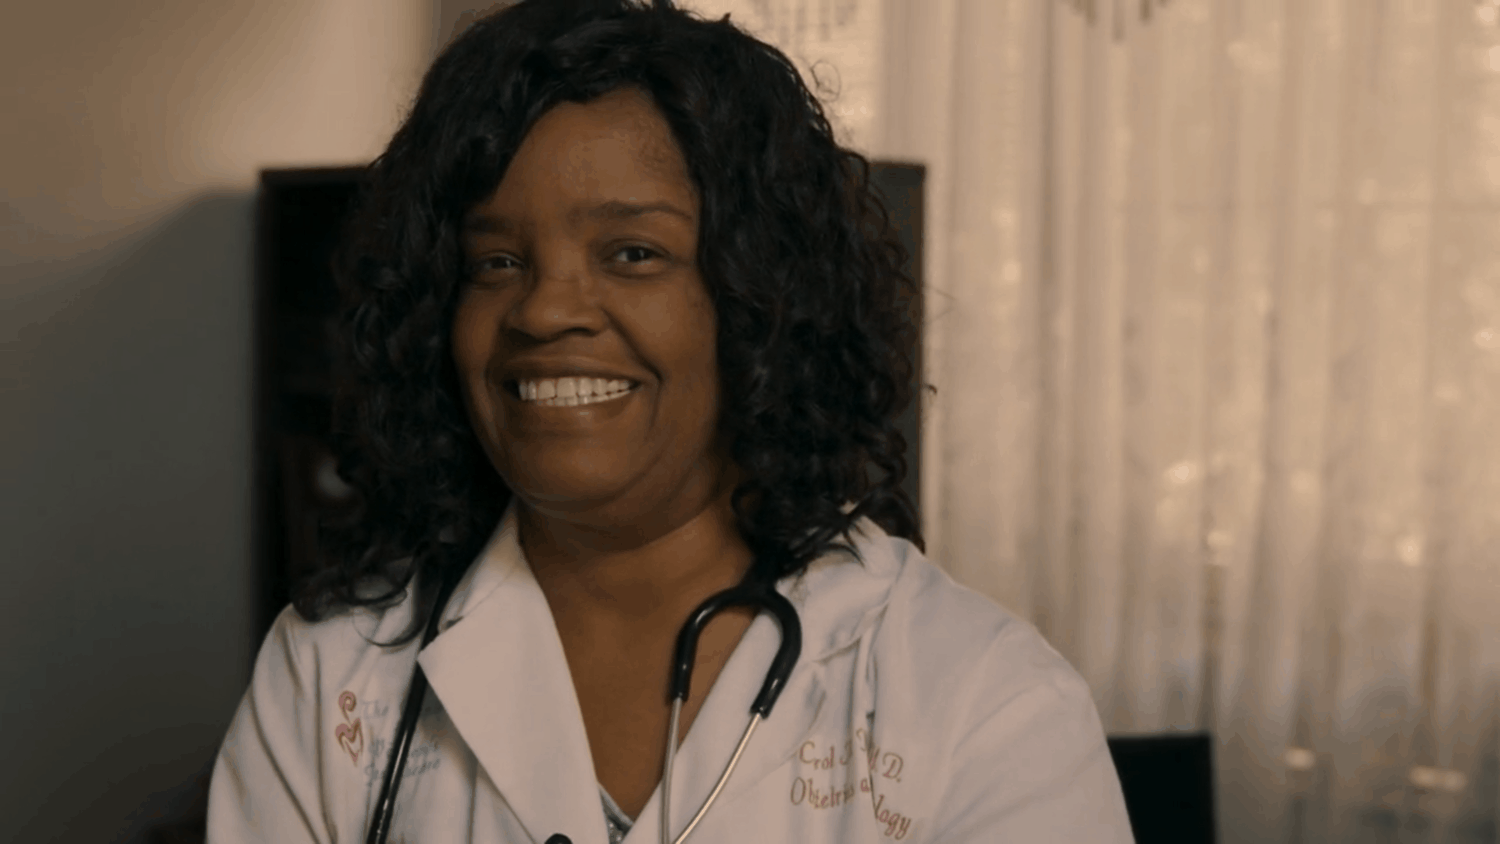 An African-American woman doctor smiles in her office